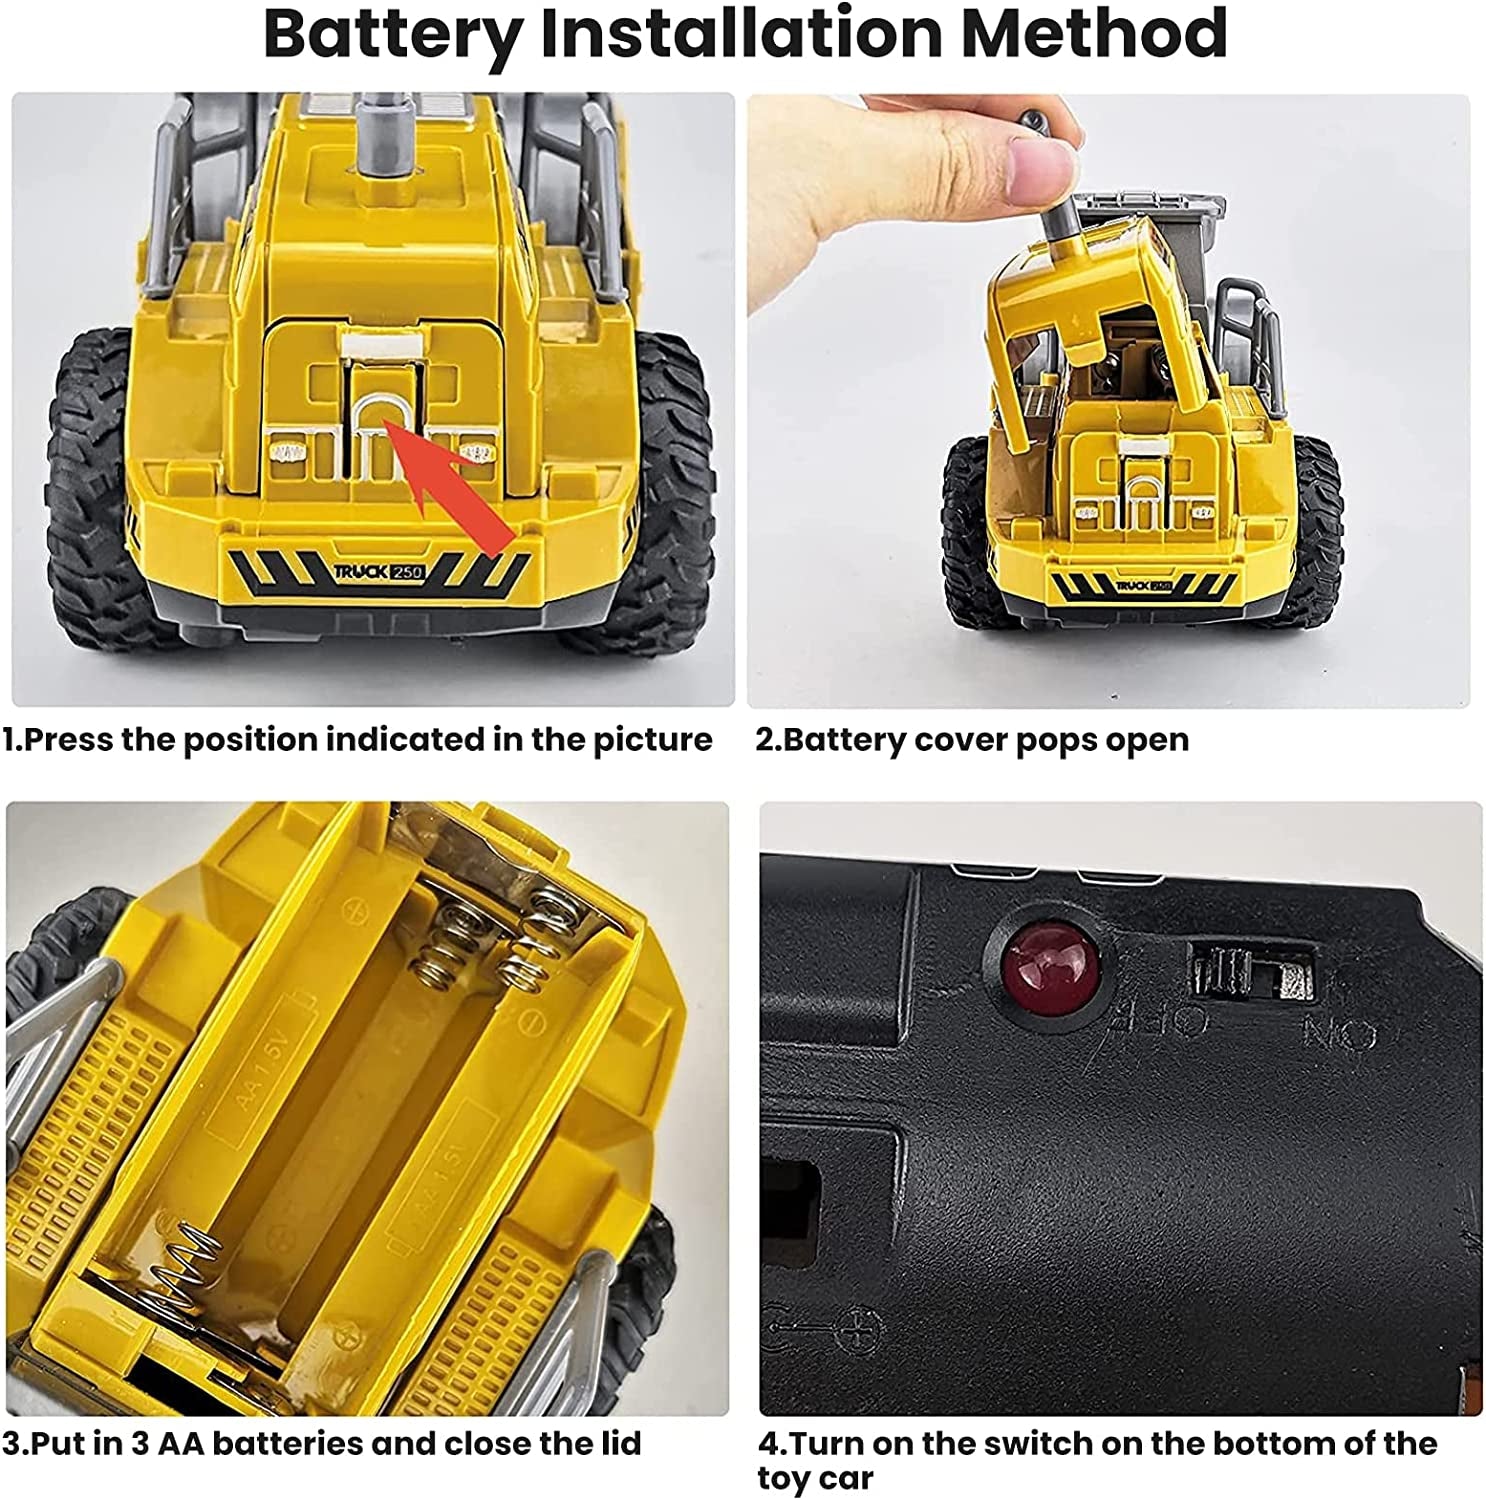 Remote Control Car Construction Vehicles Toys for Boys Girls 4-7 8-12 Gifts,Remote Control Roller Truck Toy with Flashing Lights and Remote(Roller Truck)